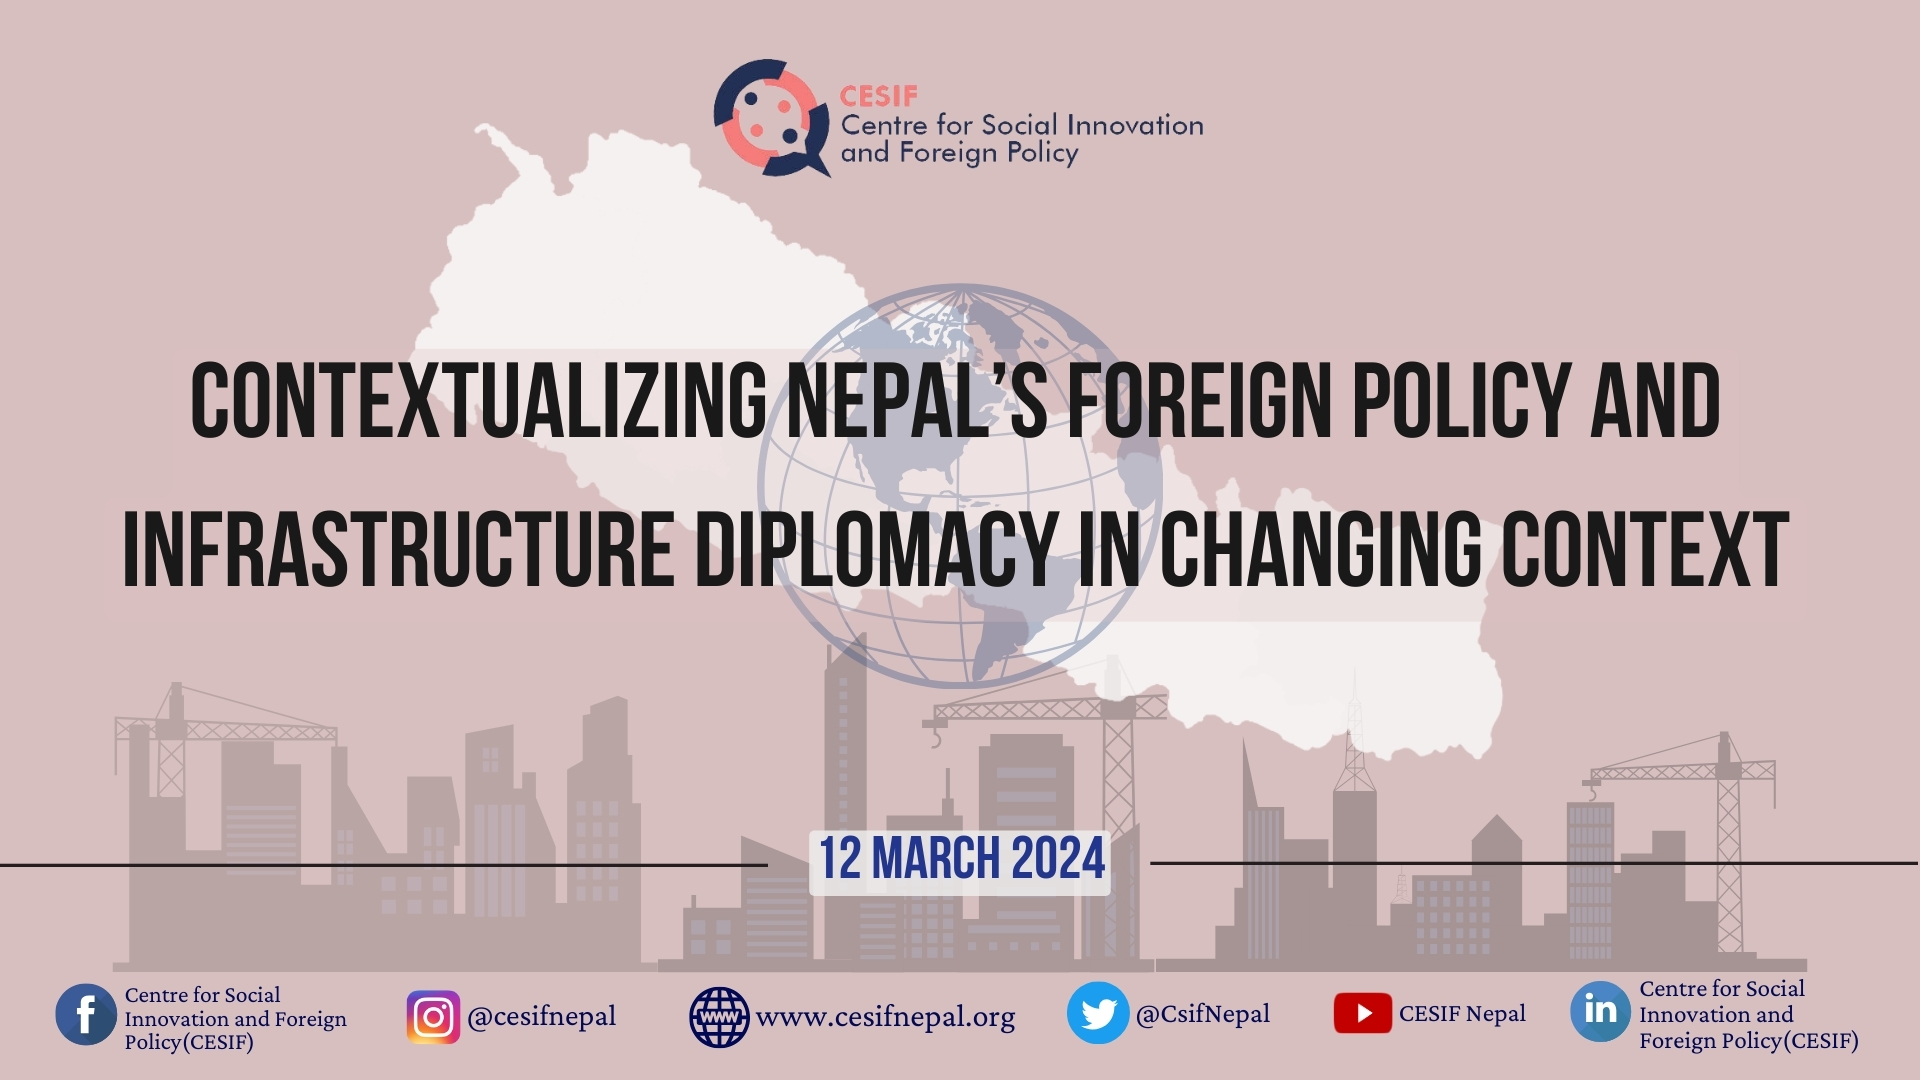 Experts call for forging a national consensus on how the country can effectively leverage foreign interests in Nepal